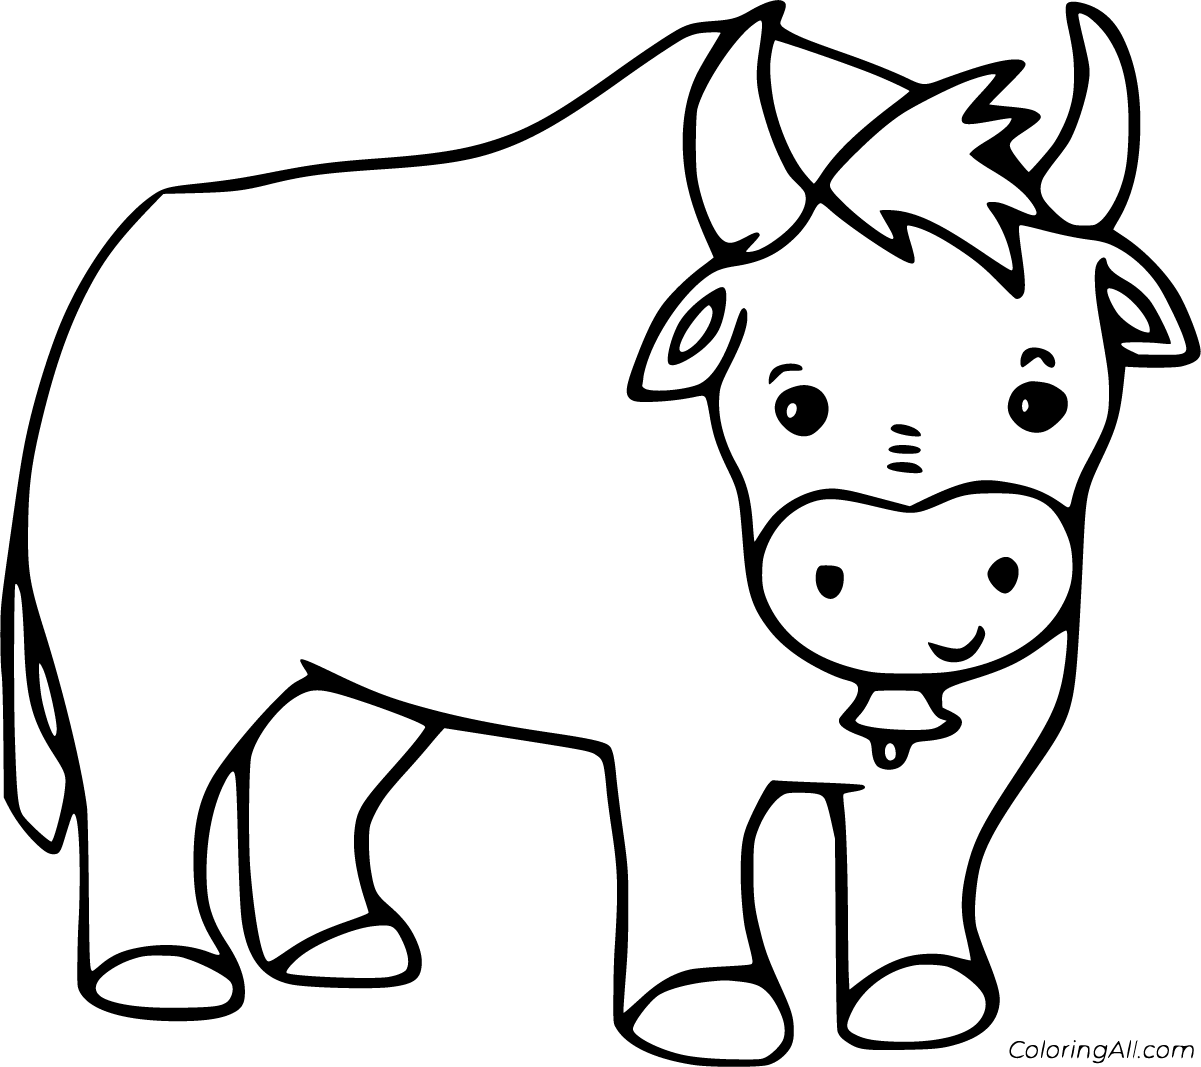 Download Ox Coloring Pages - ColoringAll